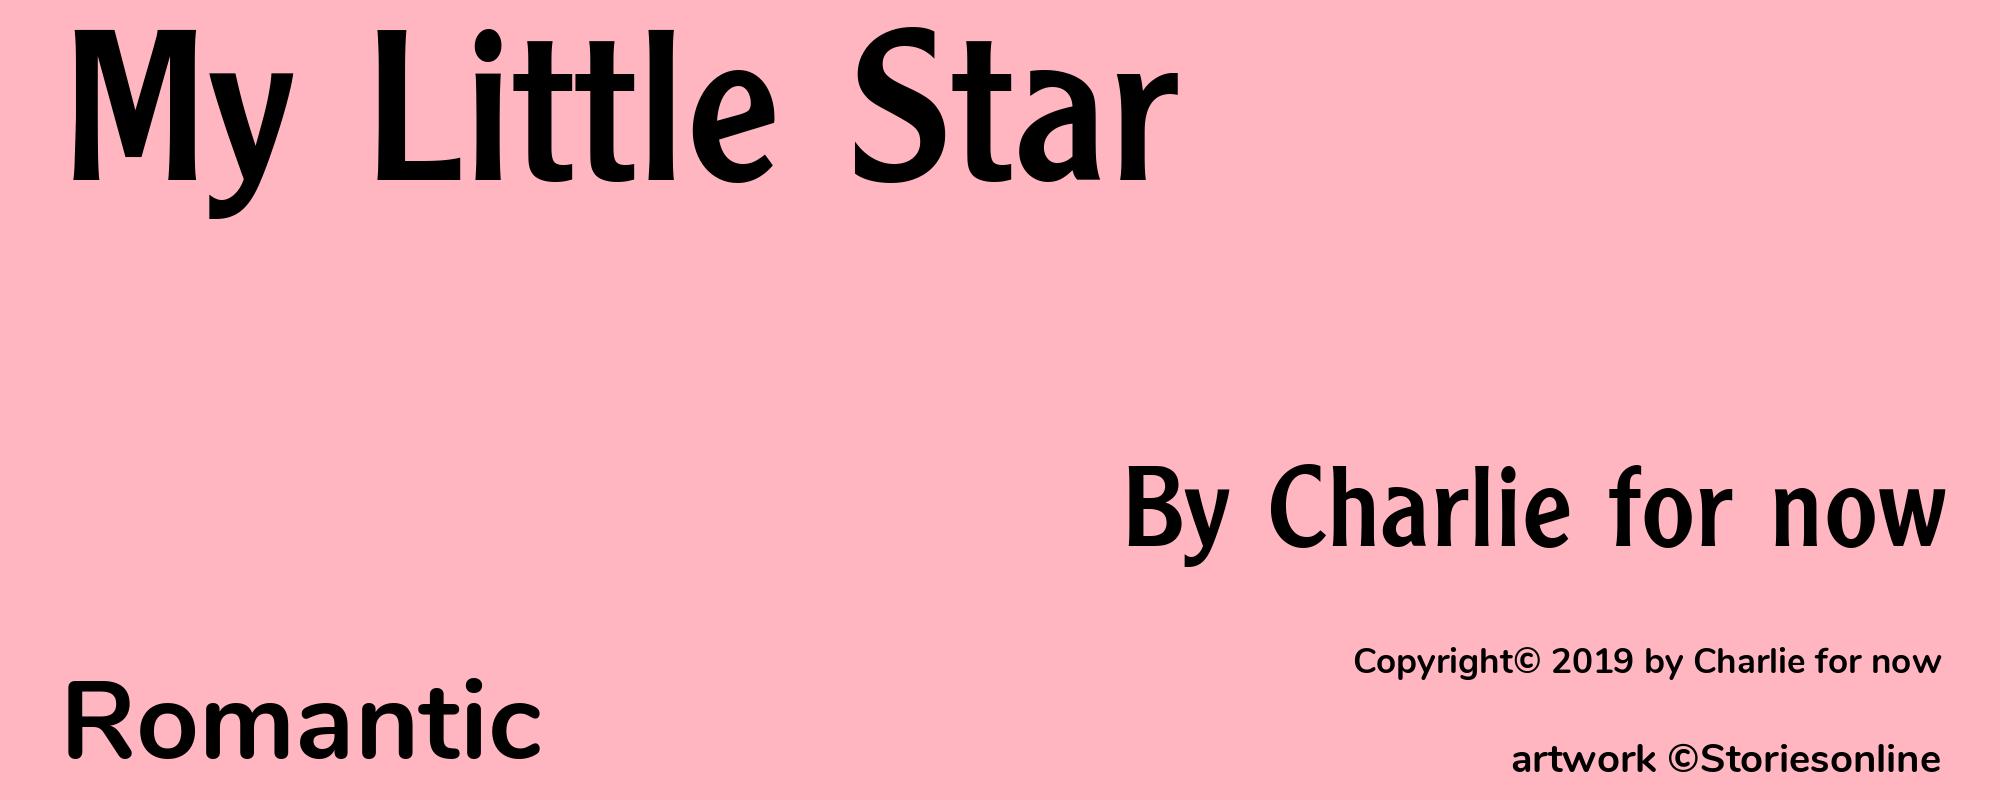 My Little Star - Cover